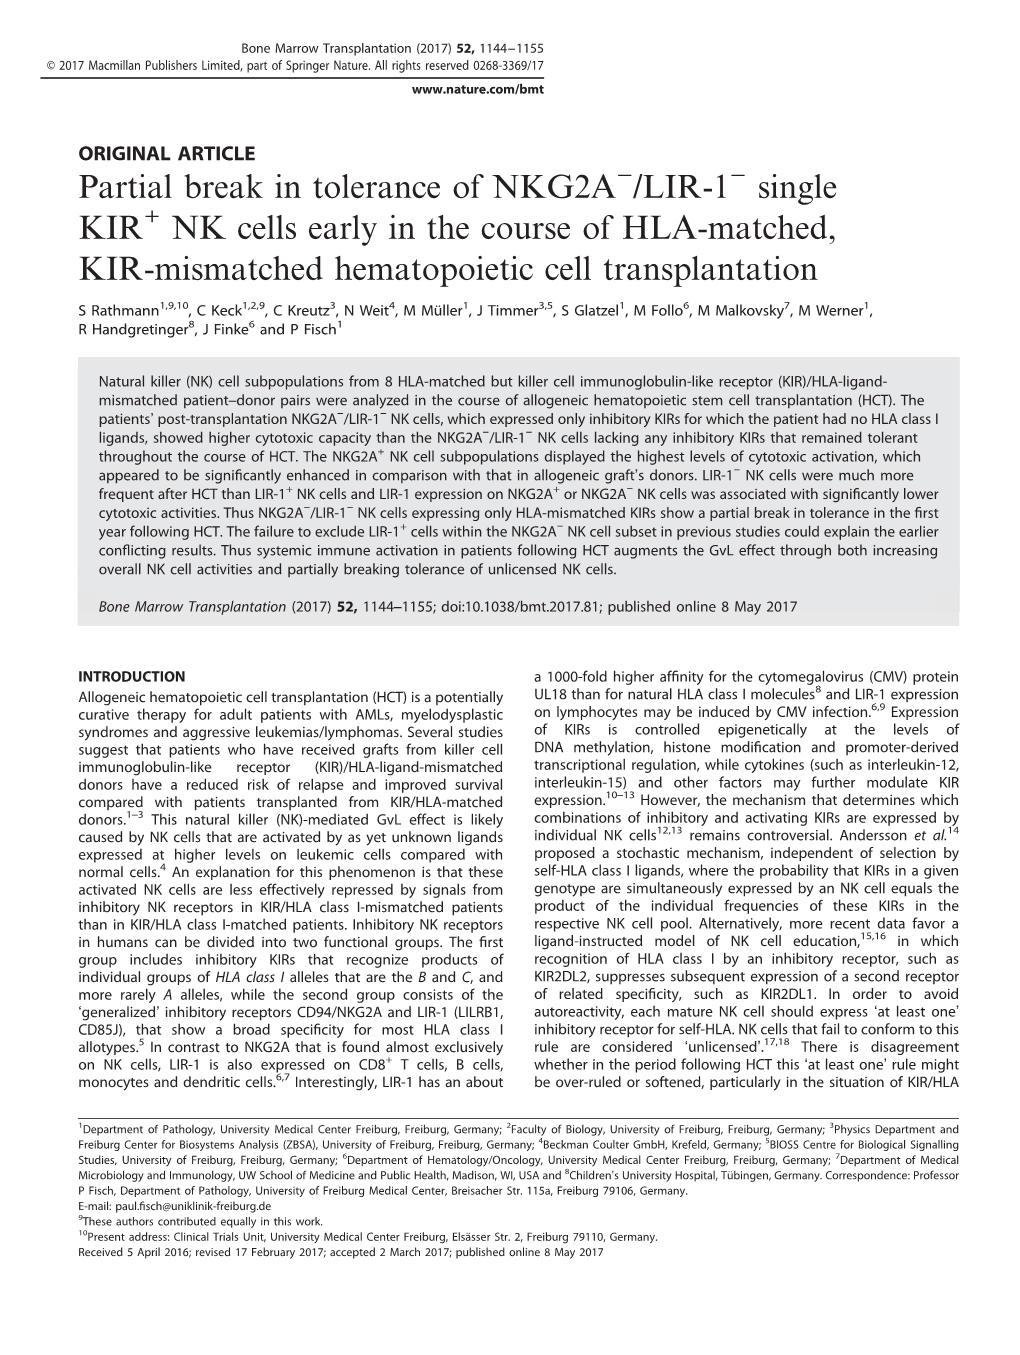 NK Cells Early in the Course of HLA-Matched, KIR-Mismatched Hematopoietic Cell Transplantation